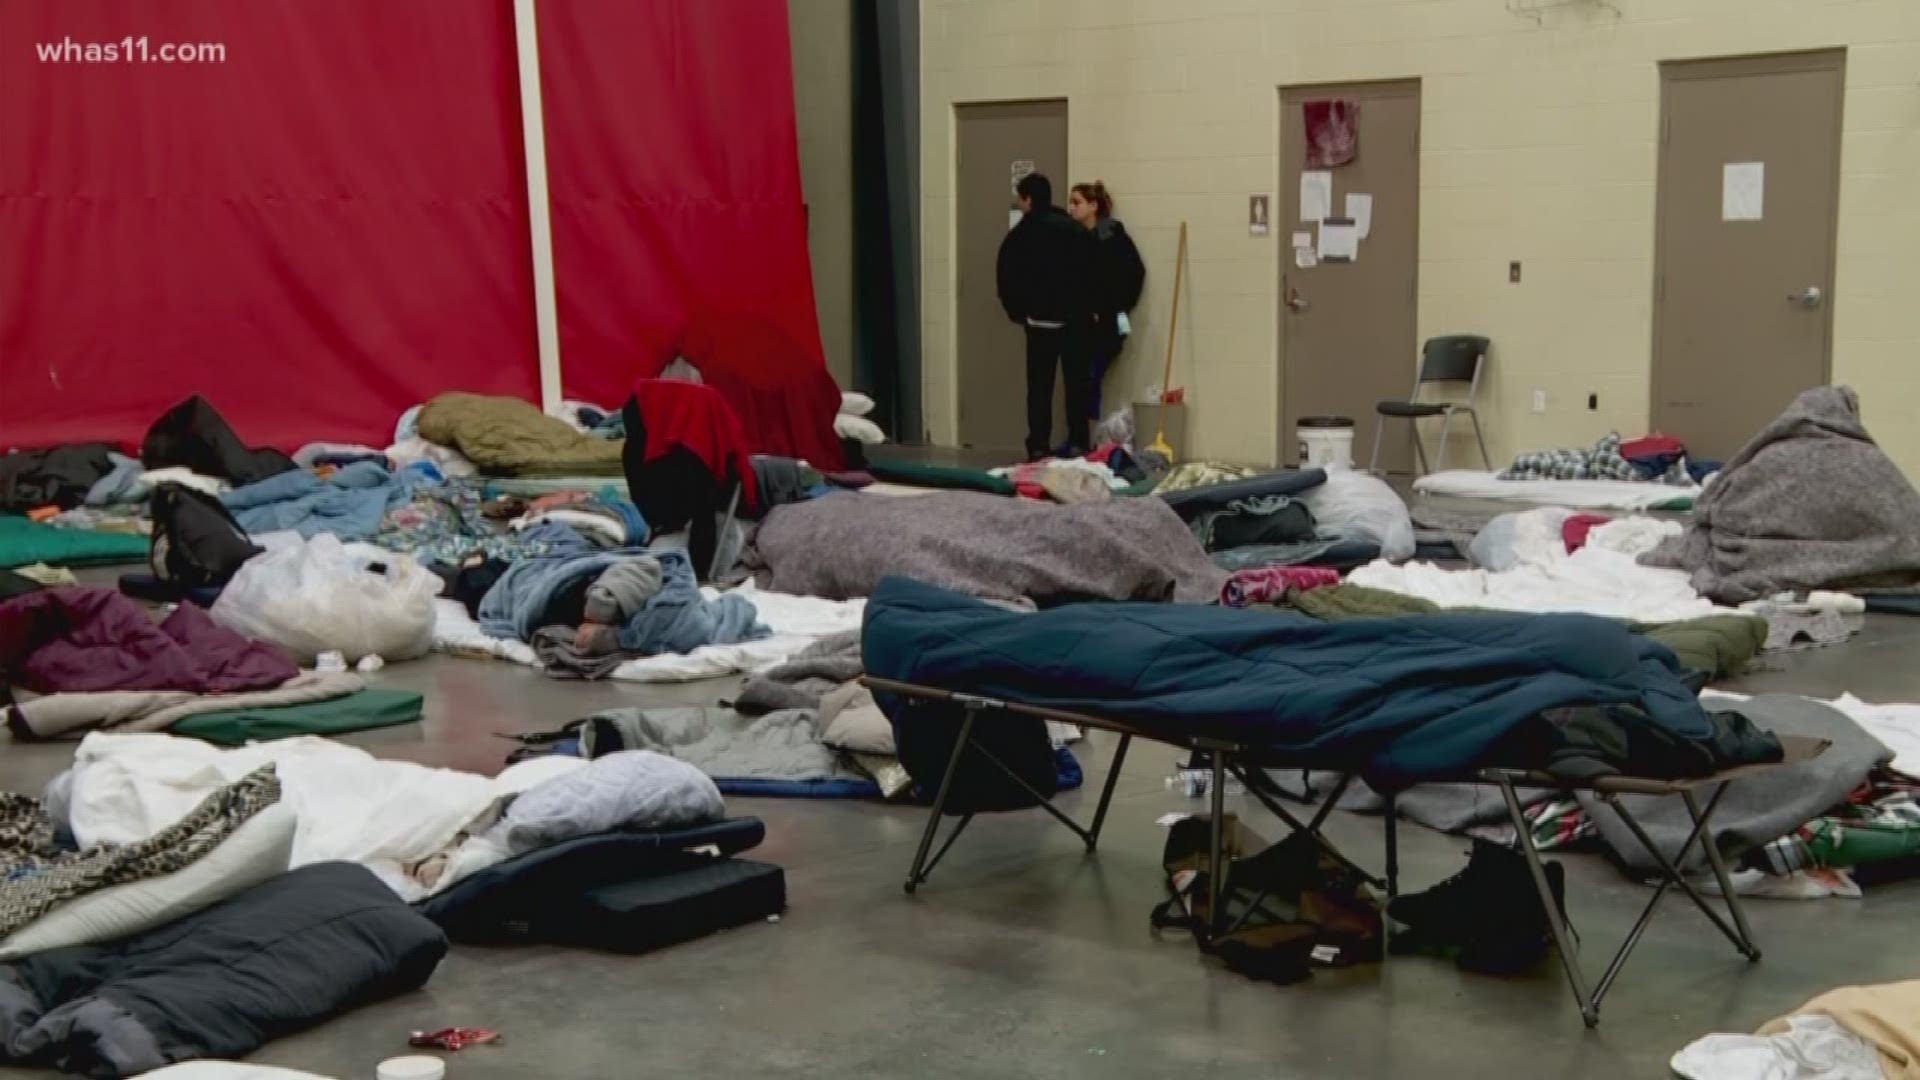 Louisville announced $1 million in funding for homeless initiatives.